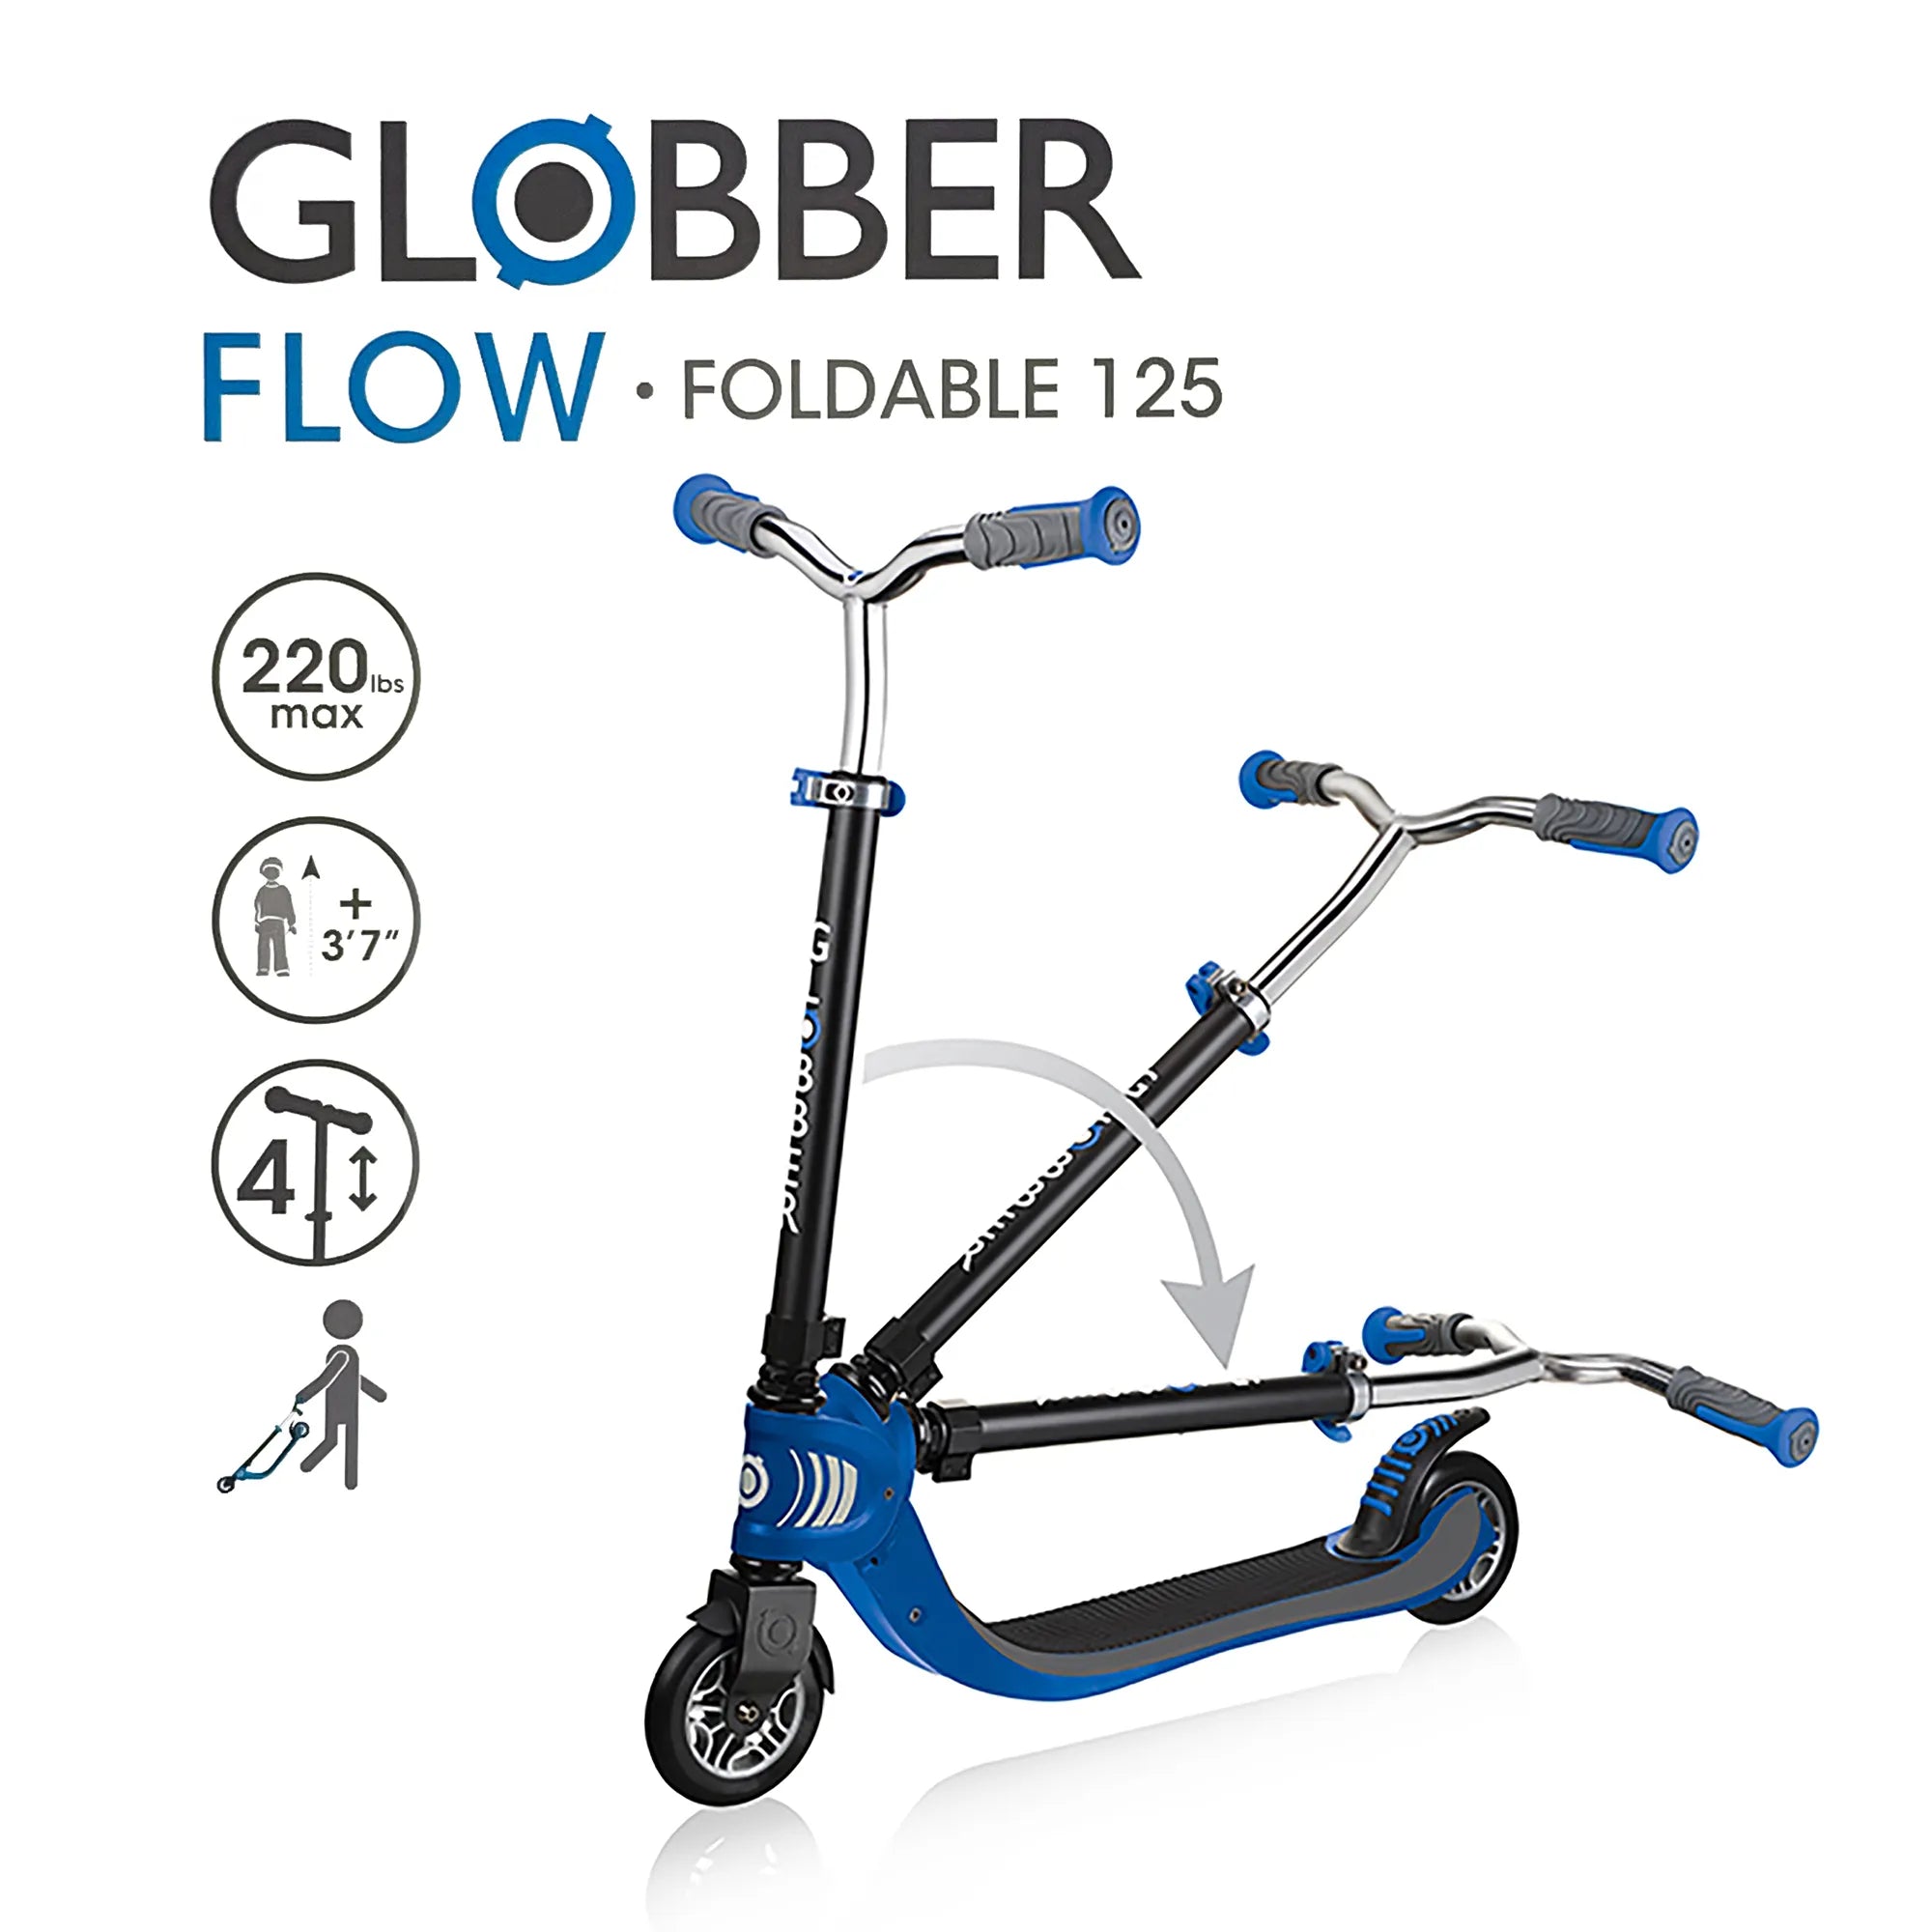 Globber Flow 125, Black & Navy Blue, Front Three Quarter View, More Features, Browns Hobby & Game.